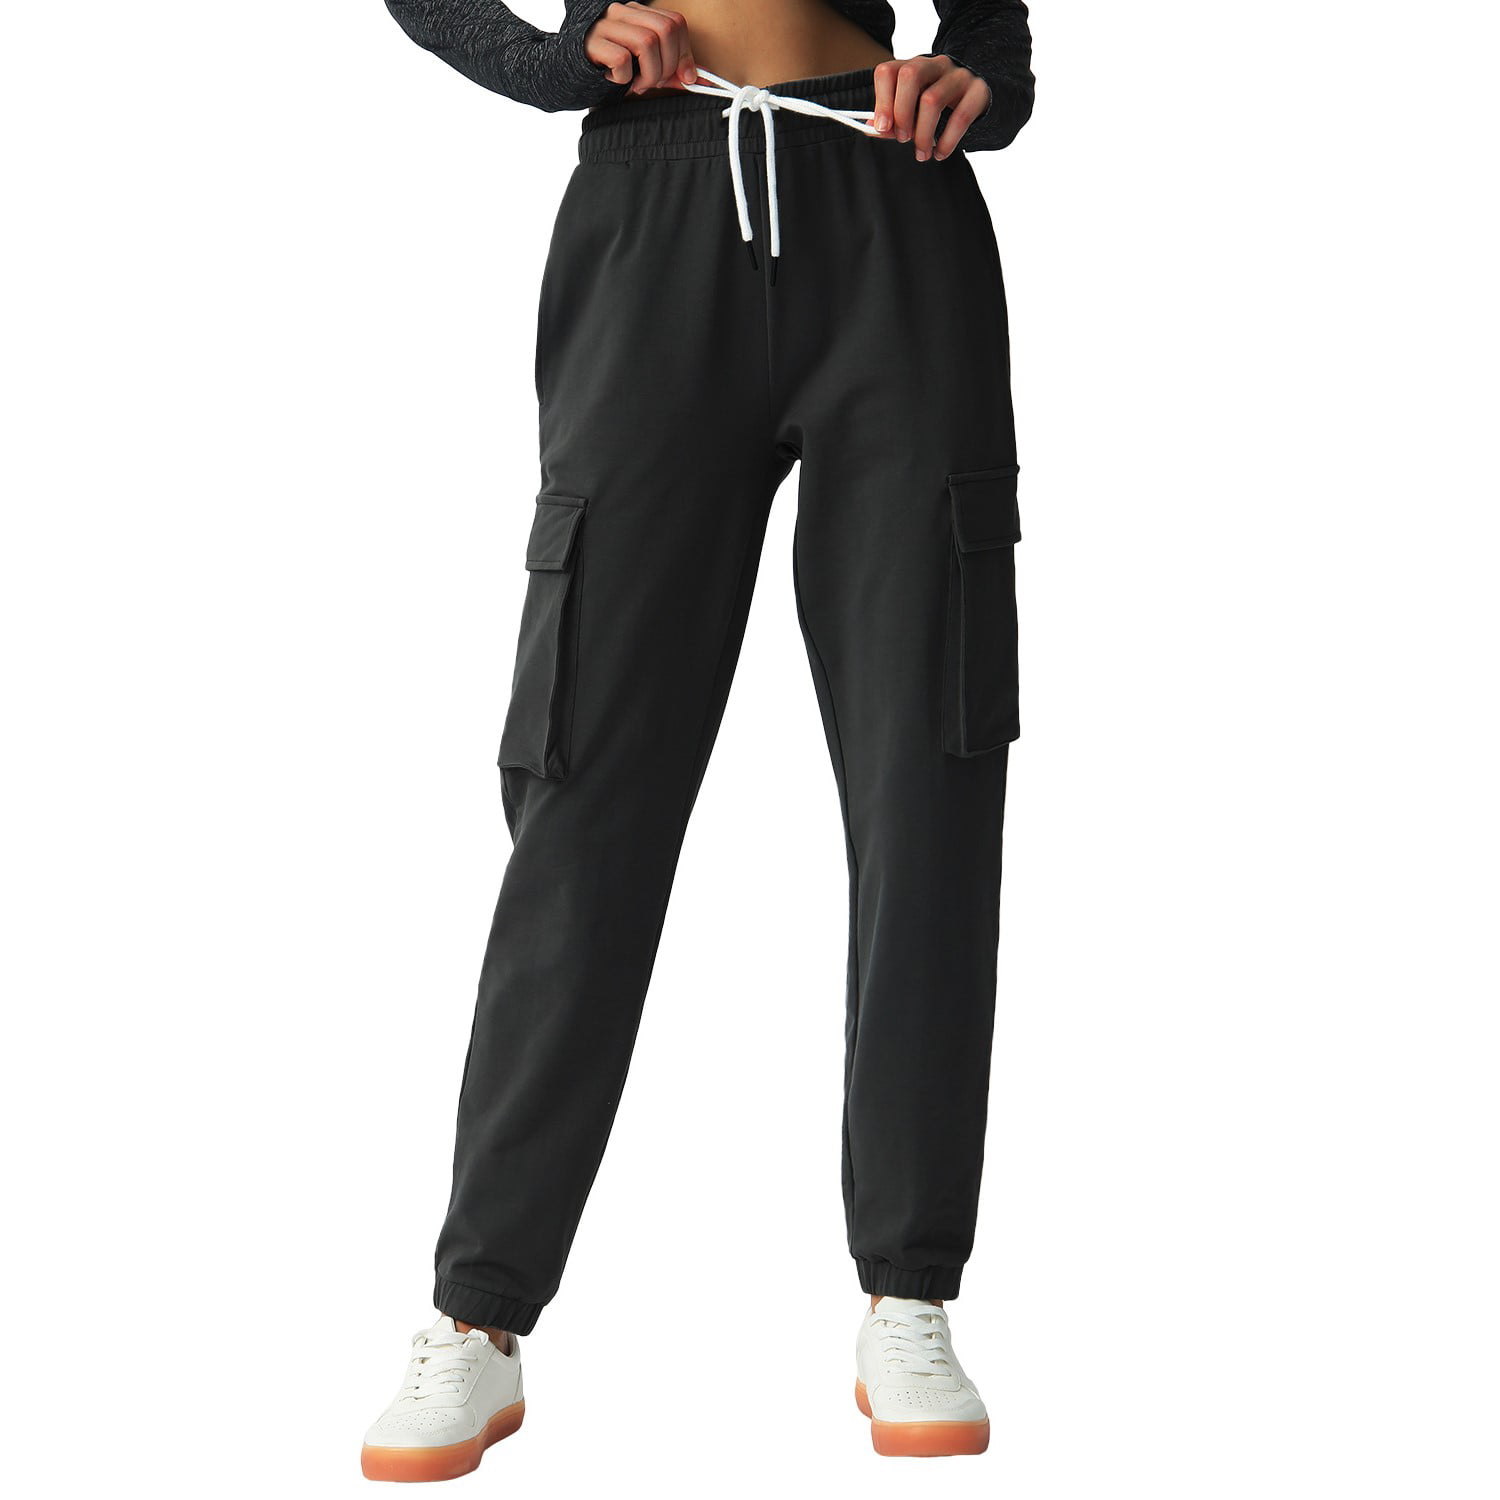 Womens Joggers Pants Lightweight Athletic Workout Running Sweatpants with Pockets Hiking Pants